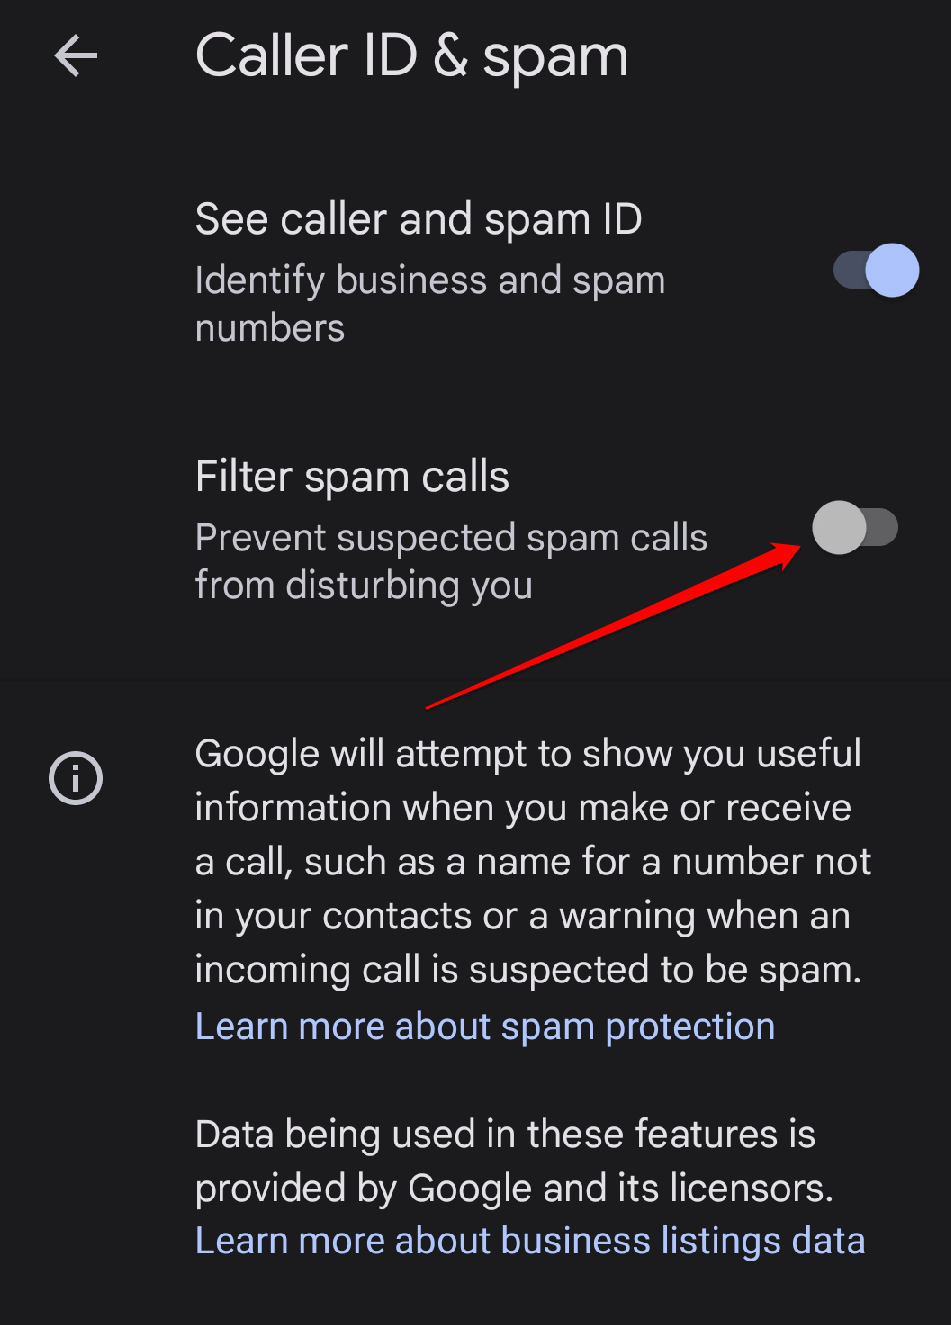 Turn on Filter spam calls.